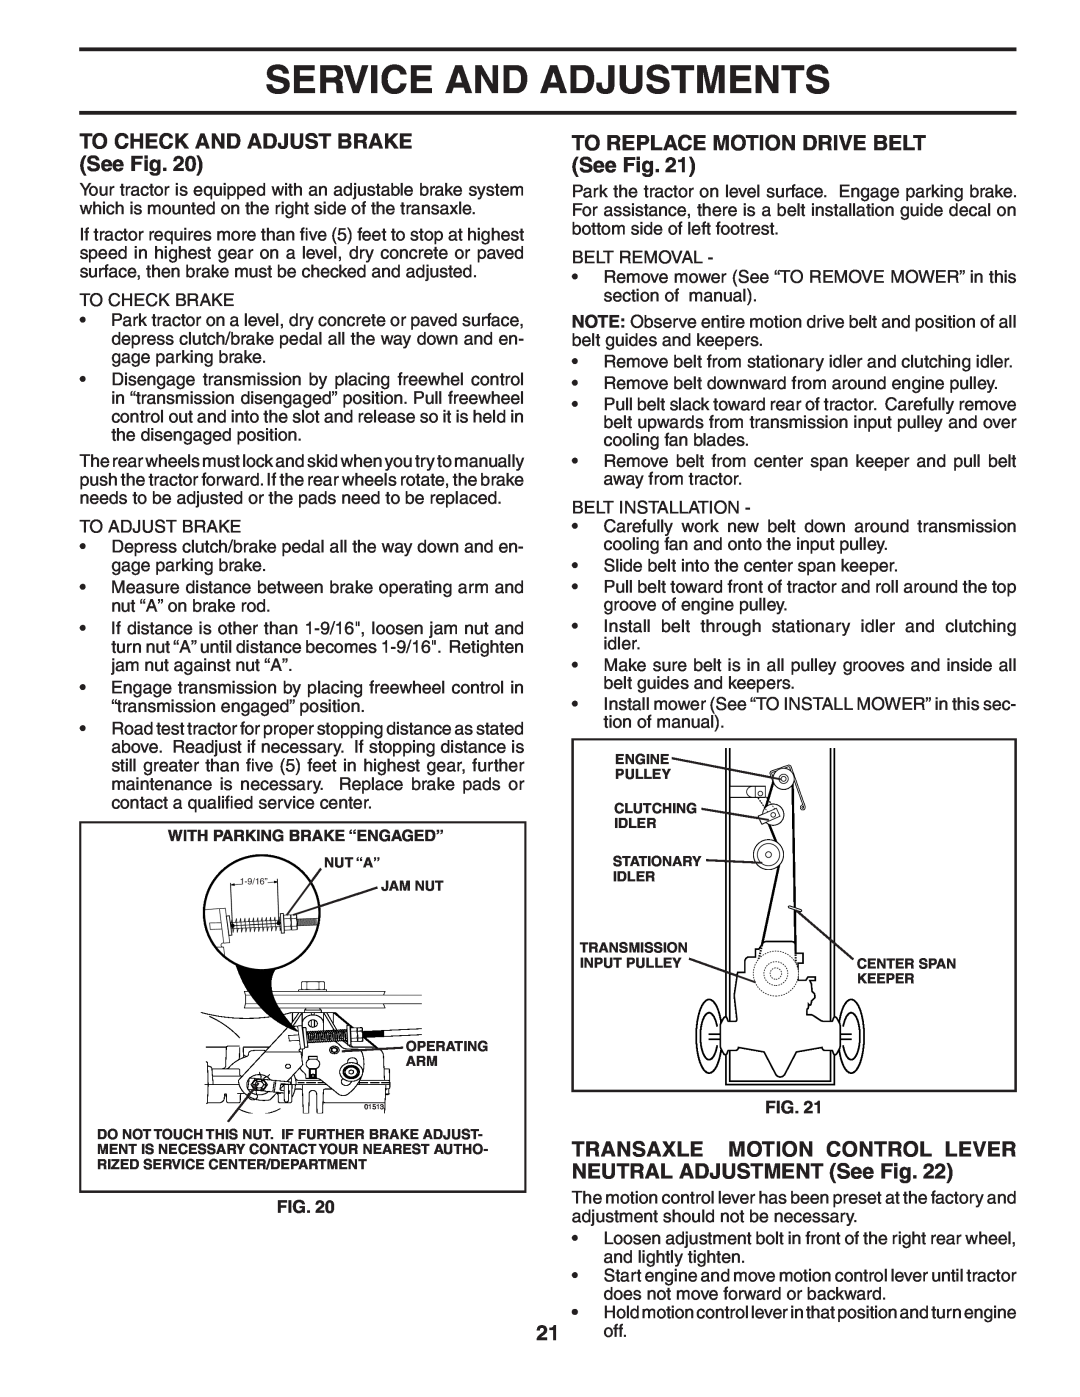 Poulan HD20H42 manual TO CHECK AND ADJUST BRAKE See Fig, TO REPLACE MOTION DRIVE BELT See Fig, Service And Adjustments 